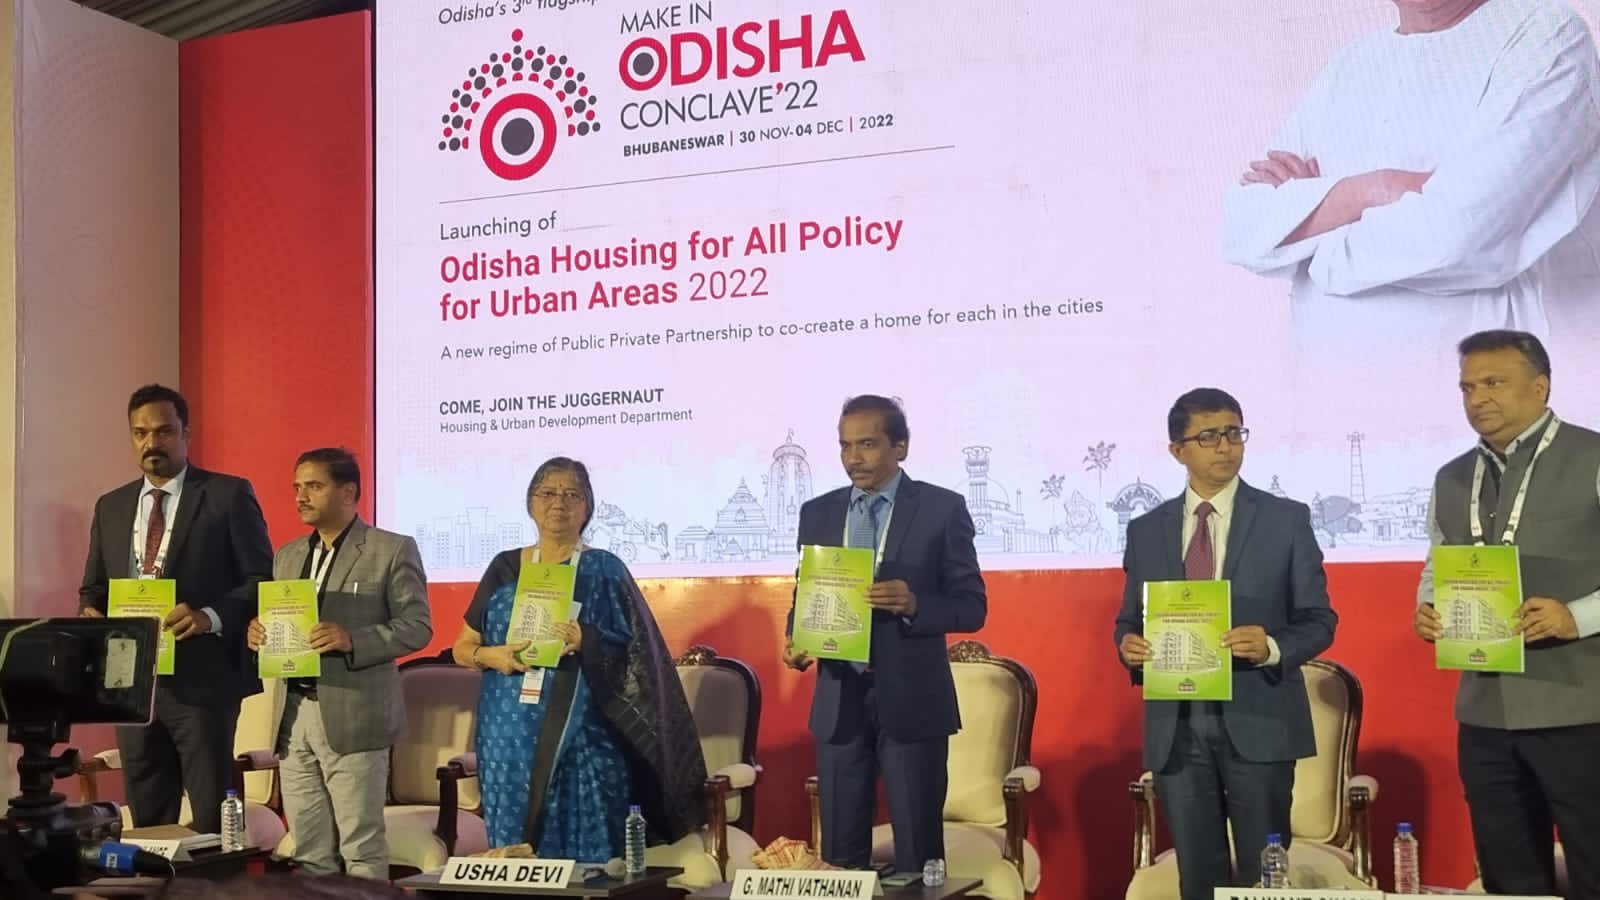 Odisha Launches Housing Policy for All for Urban Areas 2022